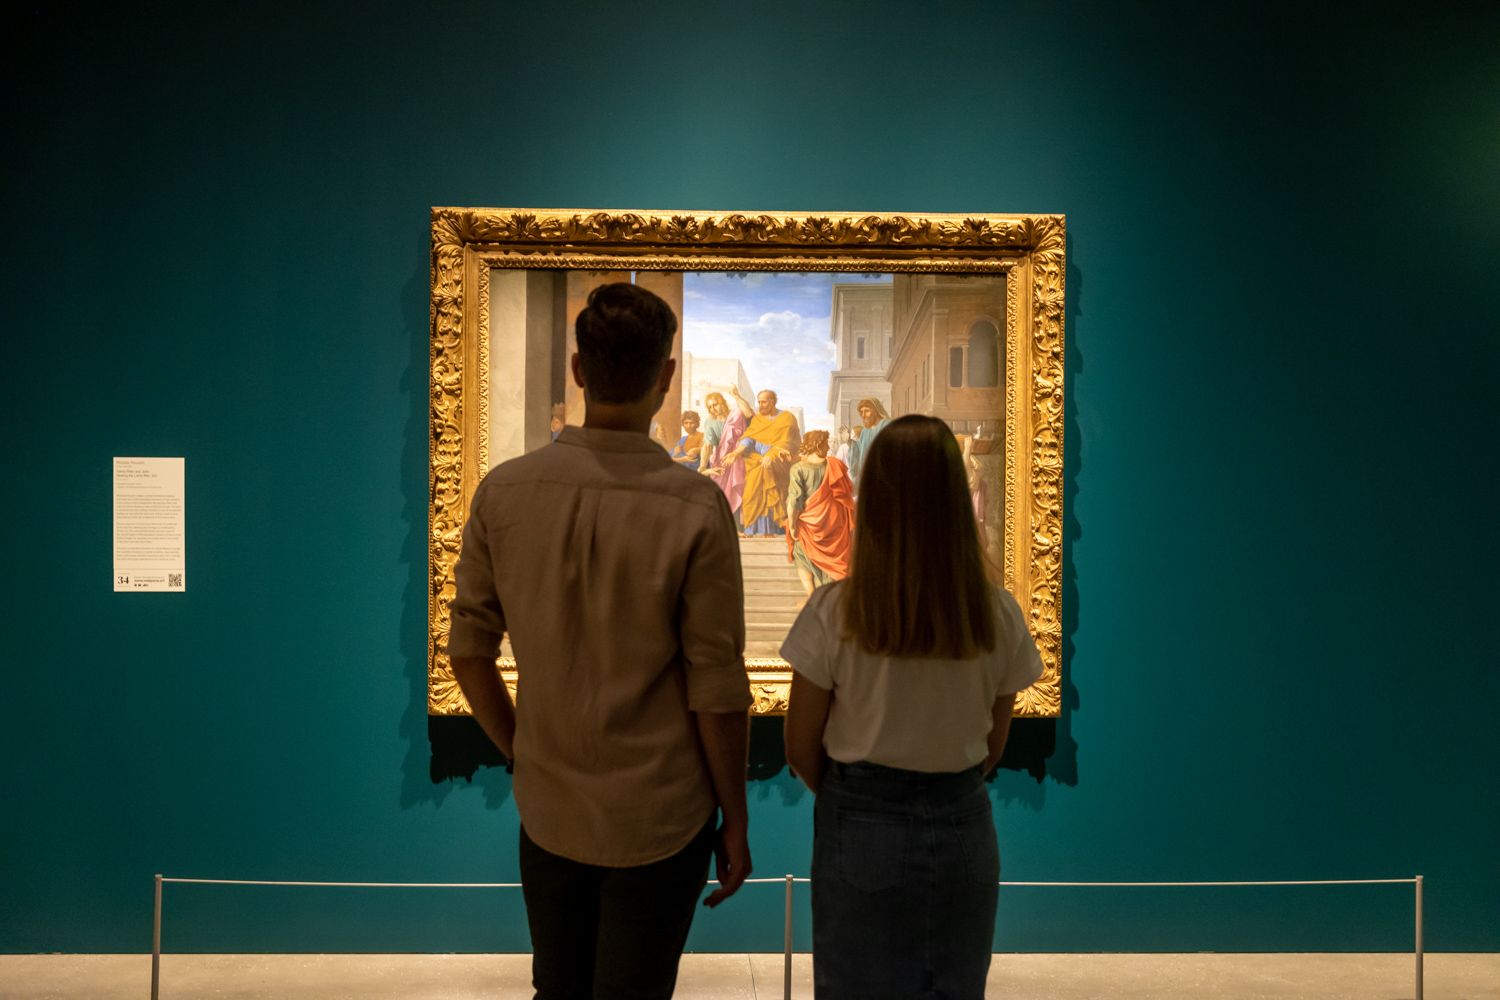 A Man And A Woman Looking At A Painting On A Wall